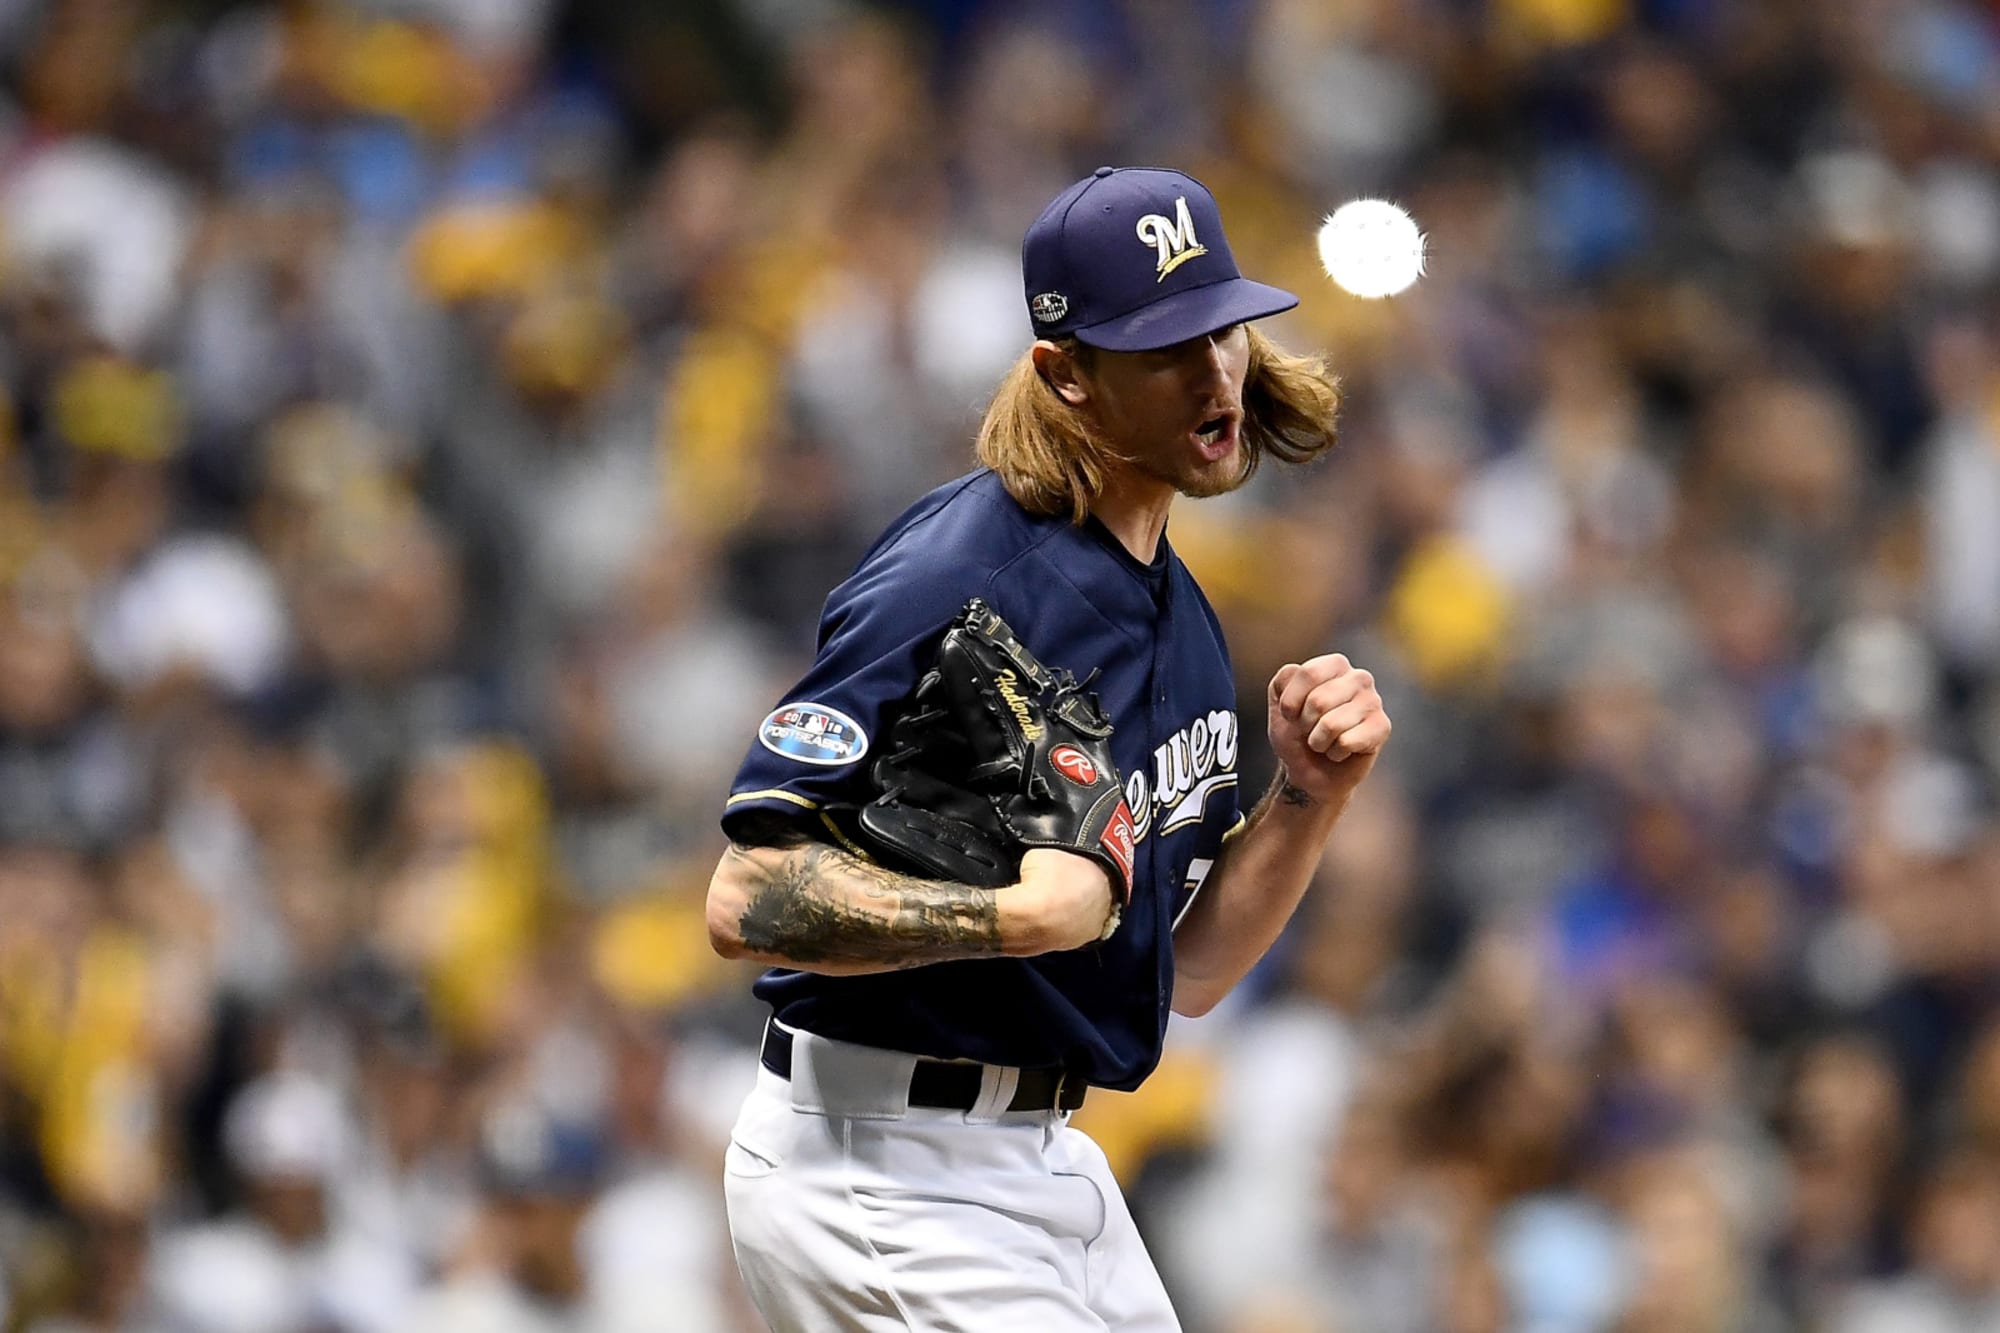 Jimmy Nelson, Brent Suter among six players added by Brewers as